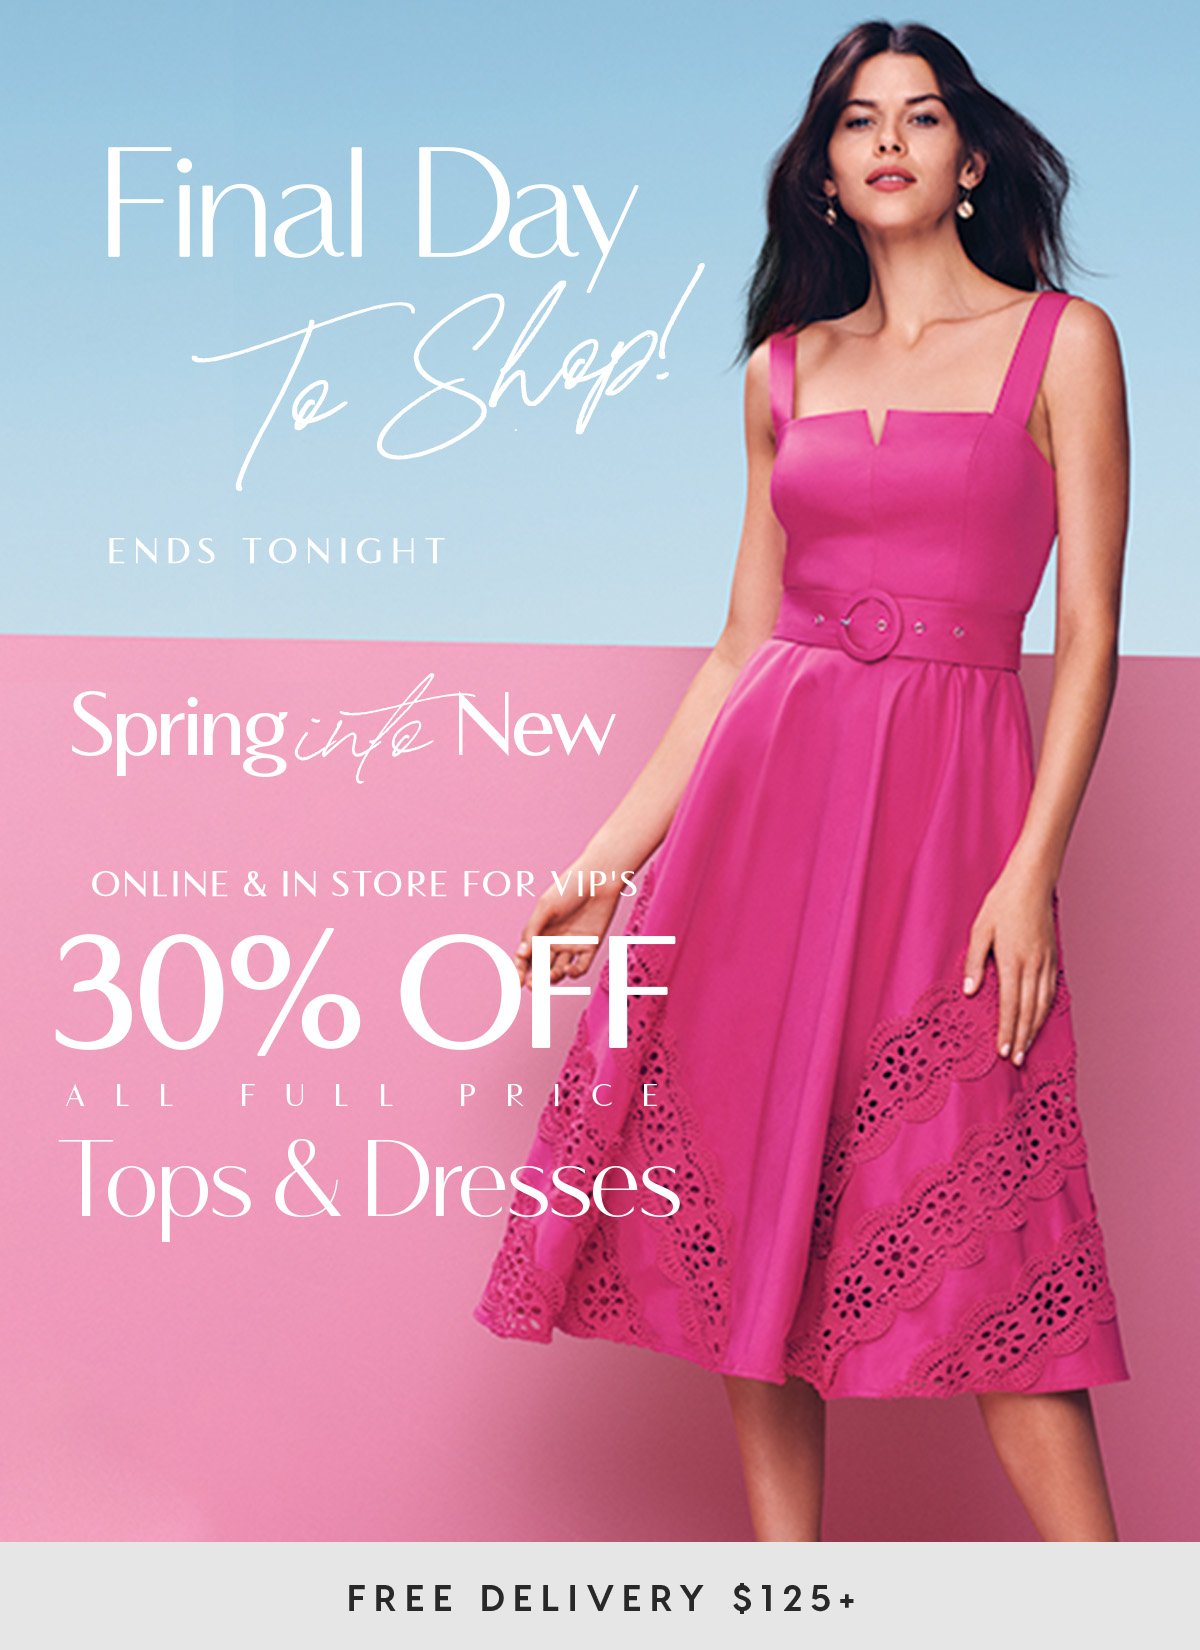 30% Off All Full Price Tops & Dresses. 700+ Styles. Free Delivery $125+